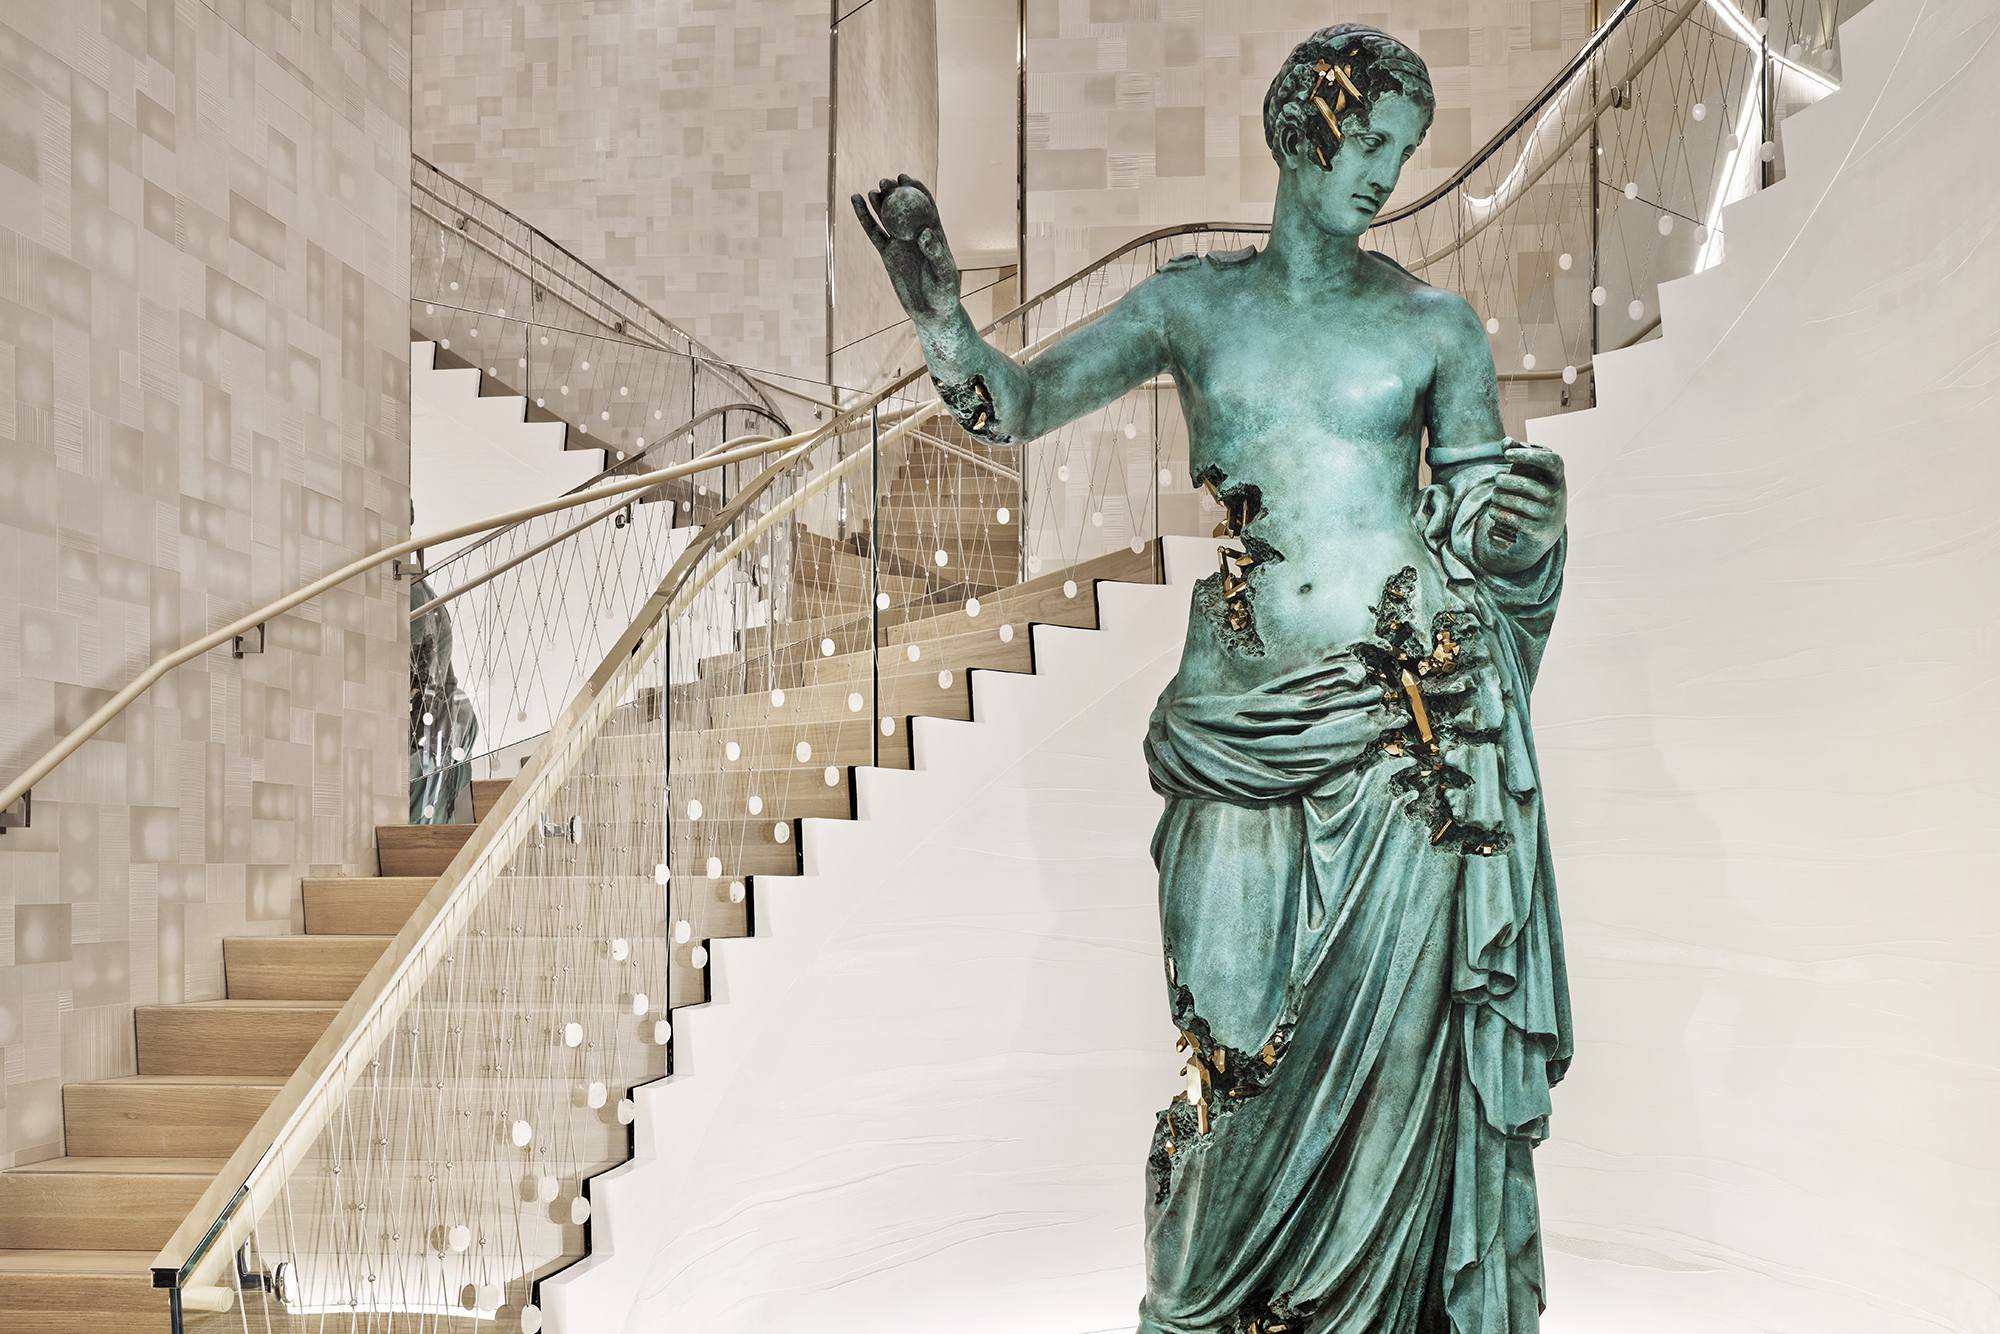 Tiffany & Co. The Landmark interior with teal statue and gold winding staircase